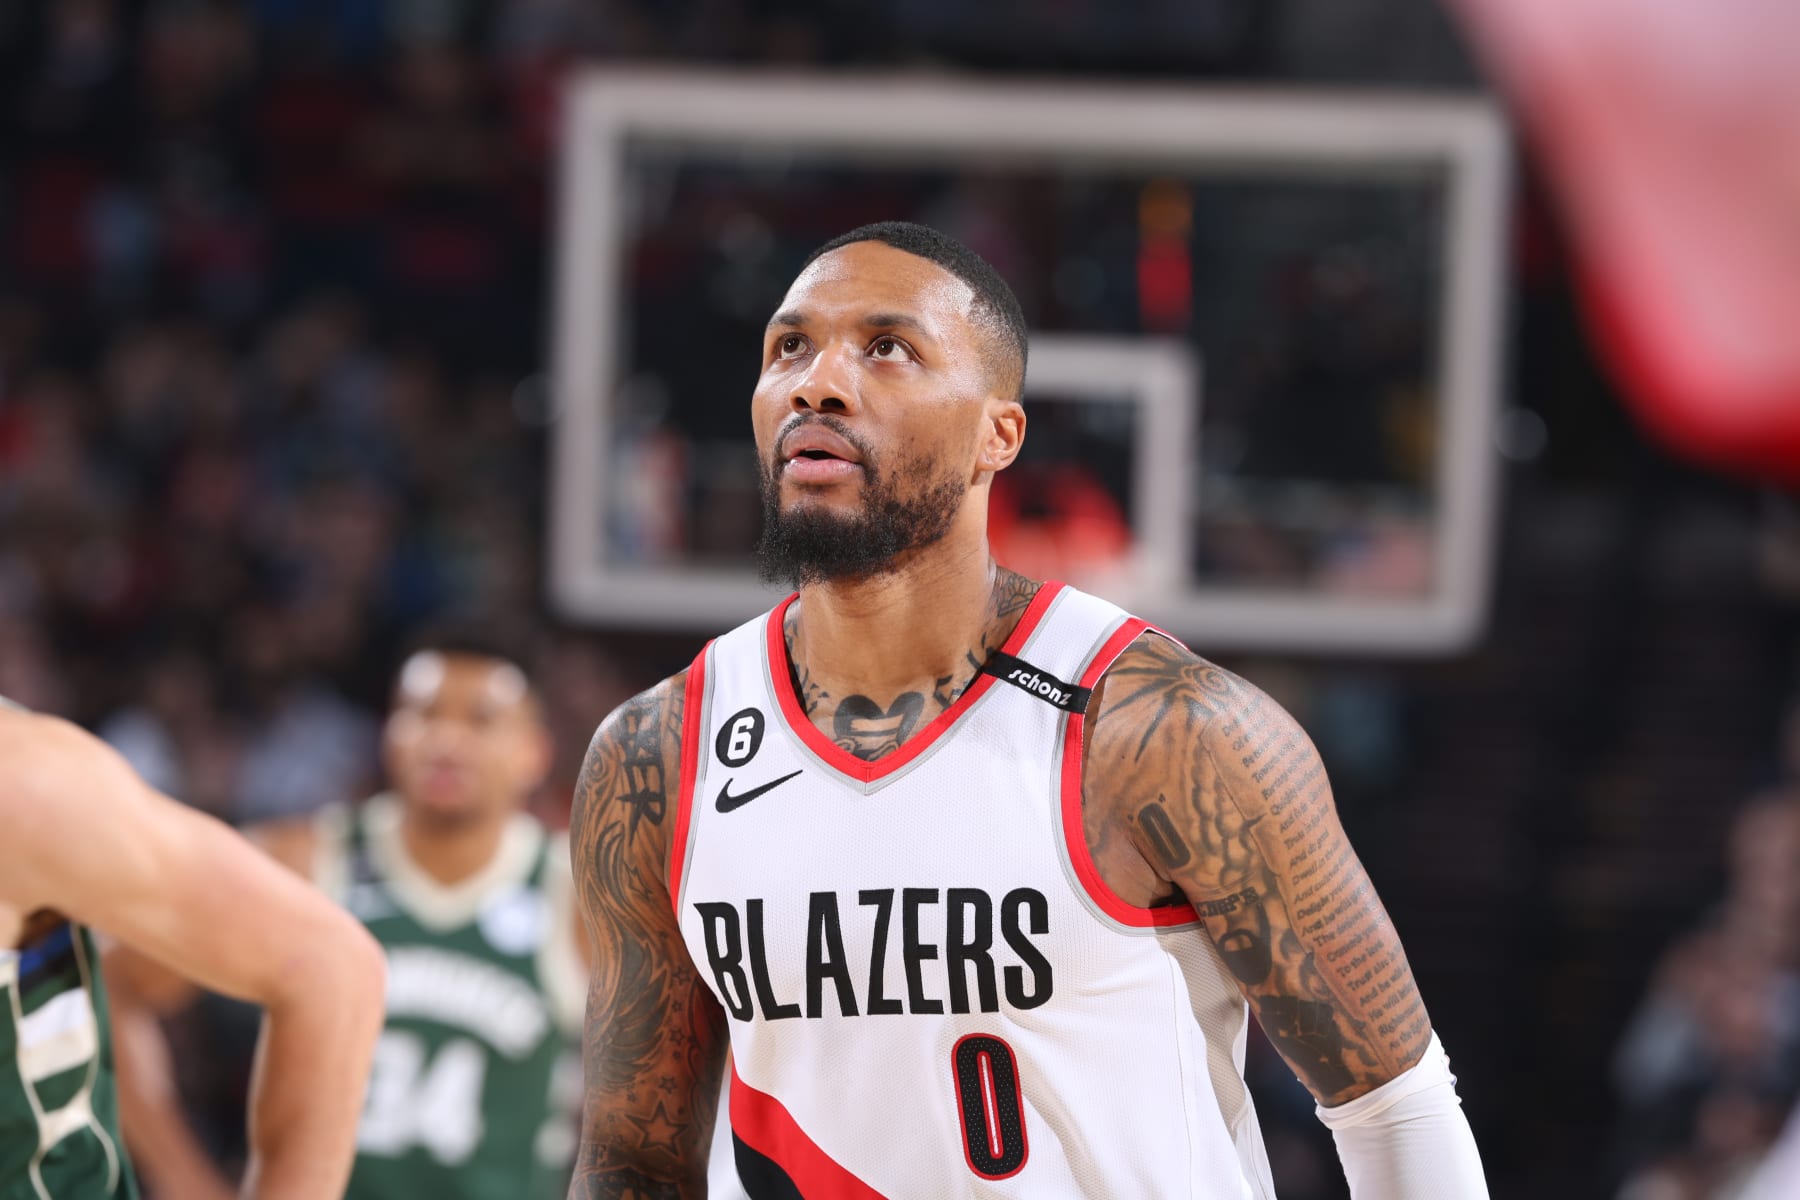 Damian Lillard requests trade after 11 seasons with Blazers